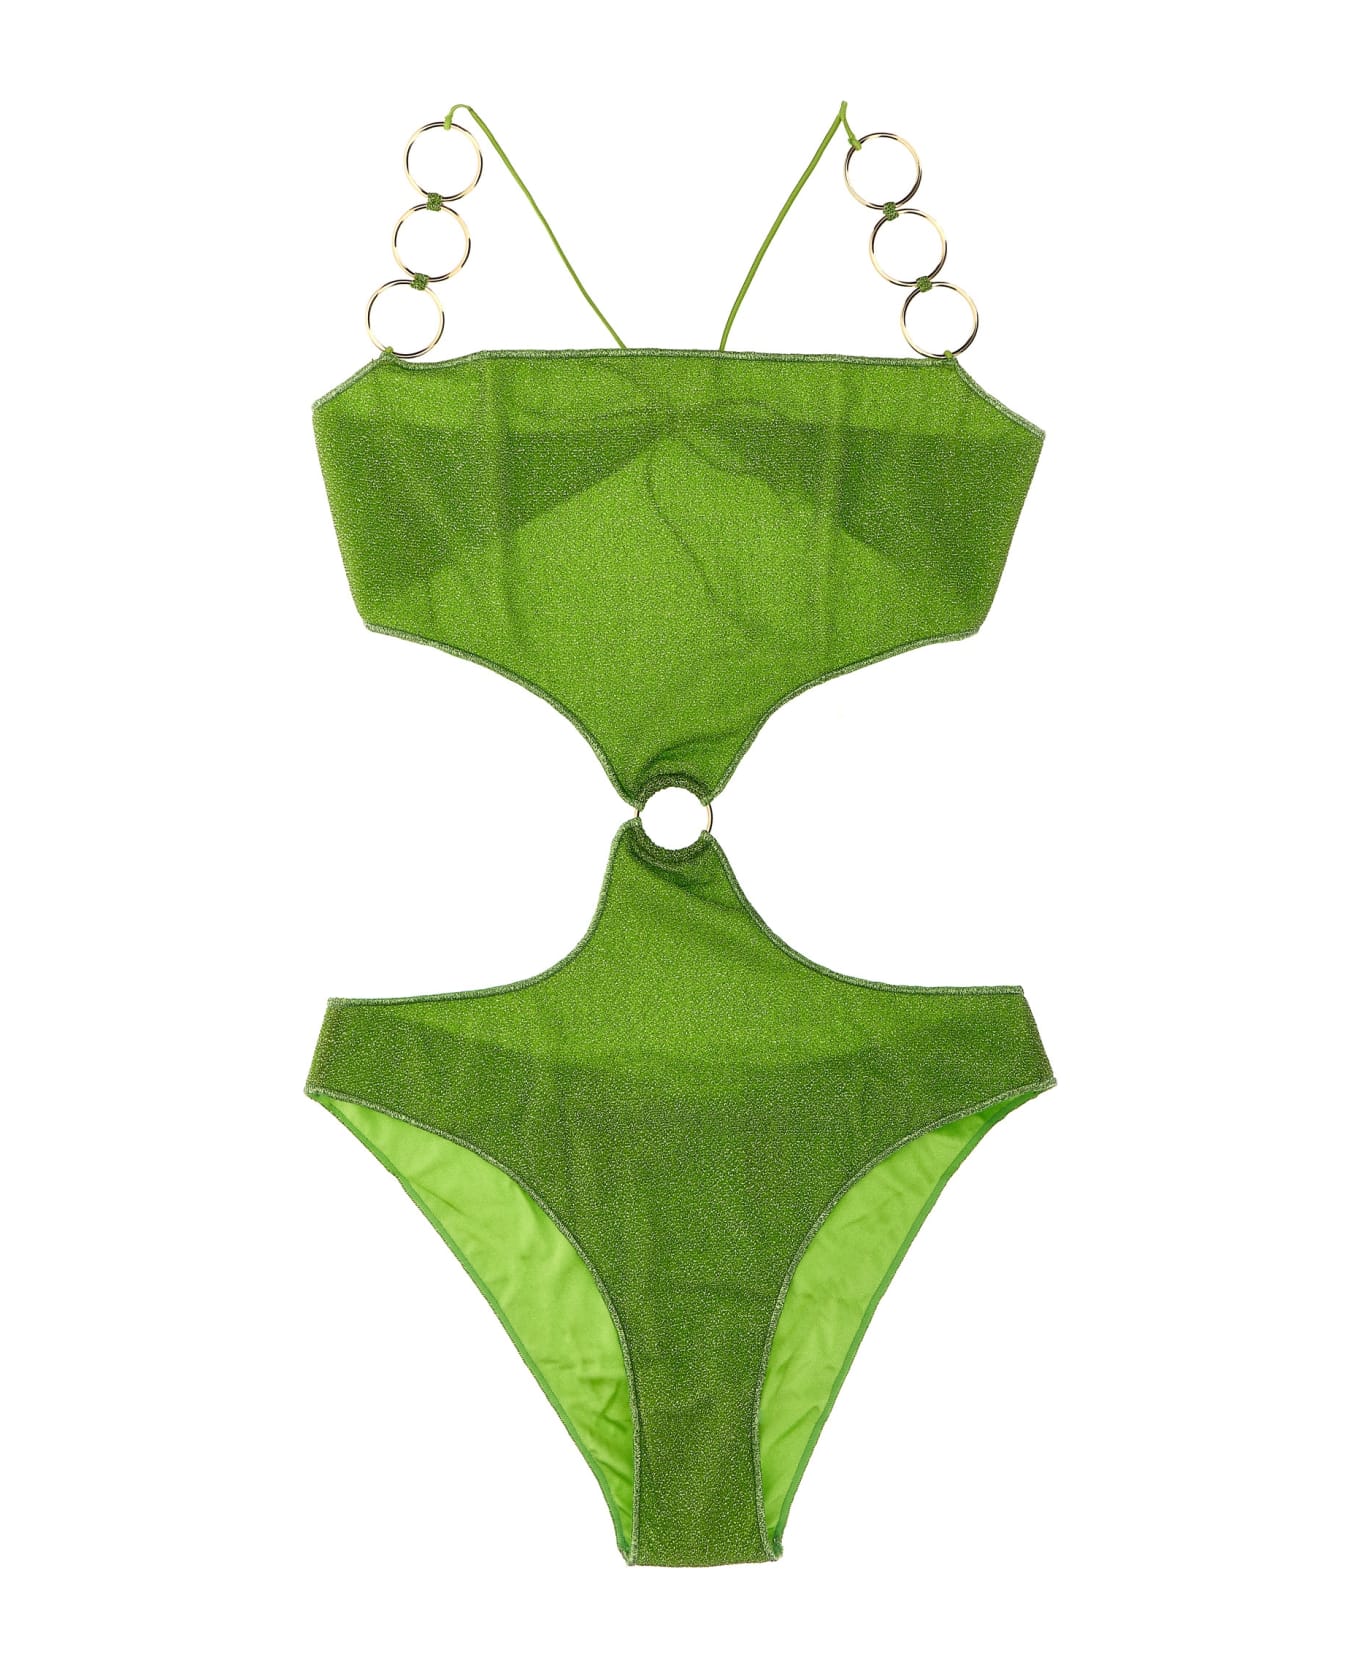 Oseree 'lumiere' One-piece Swimsuit - Lime 水着